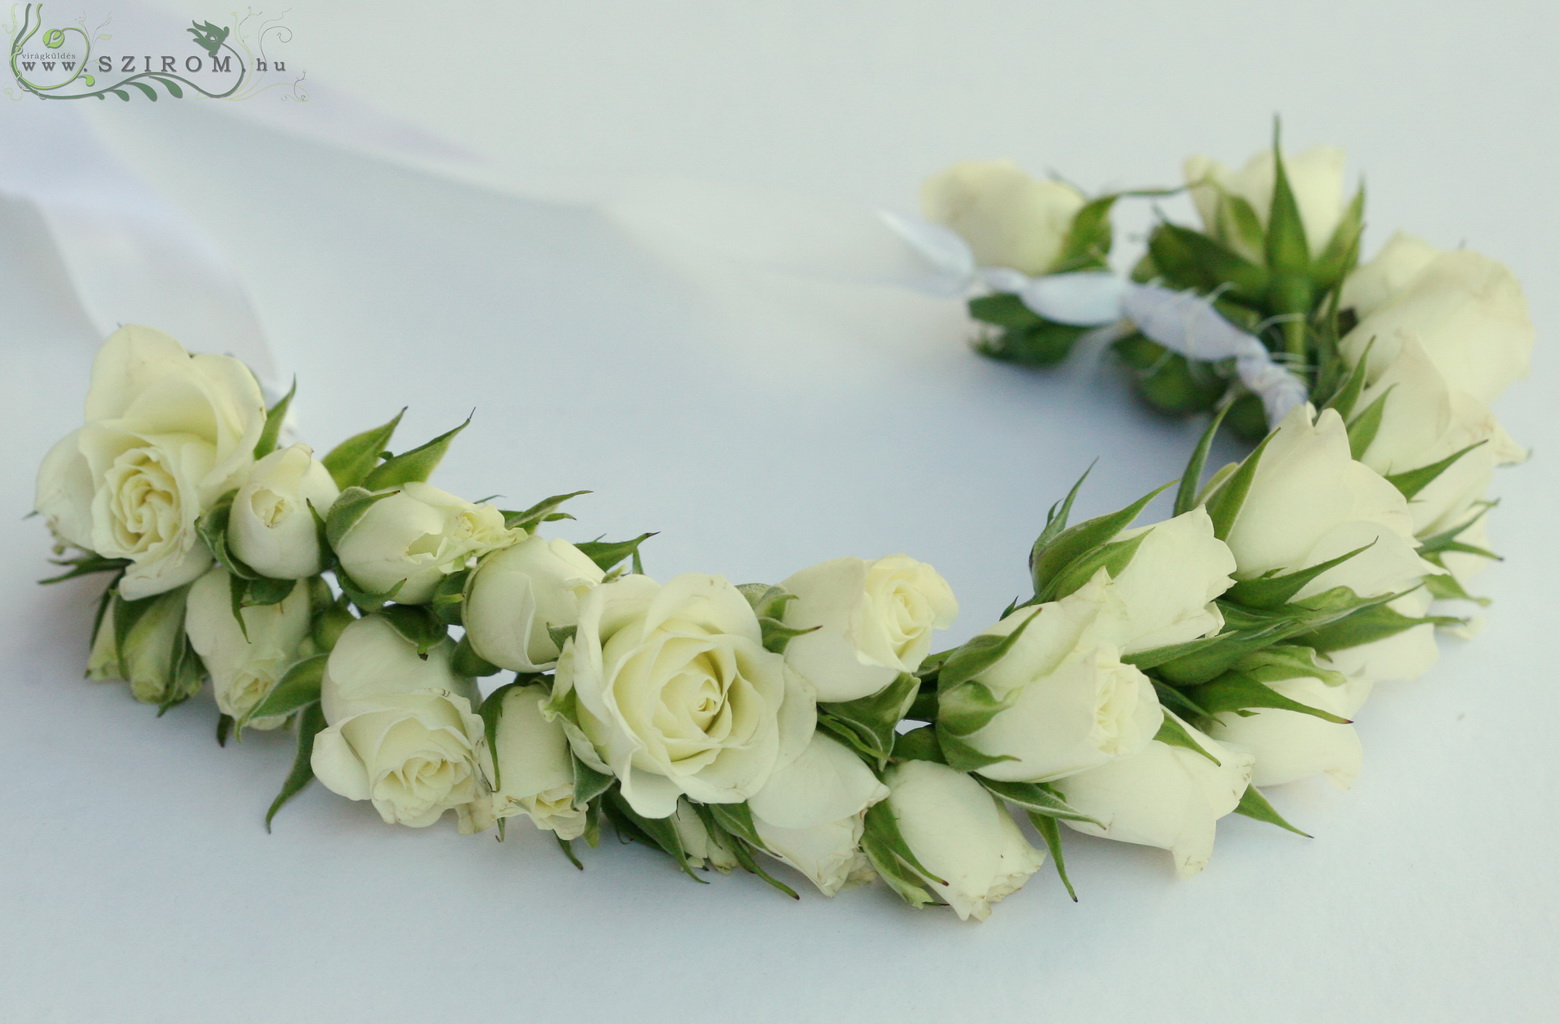 flower delivery Budapest - hair wreath made of spray roses (white)